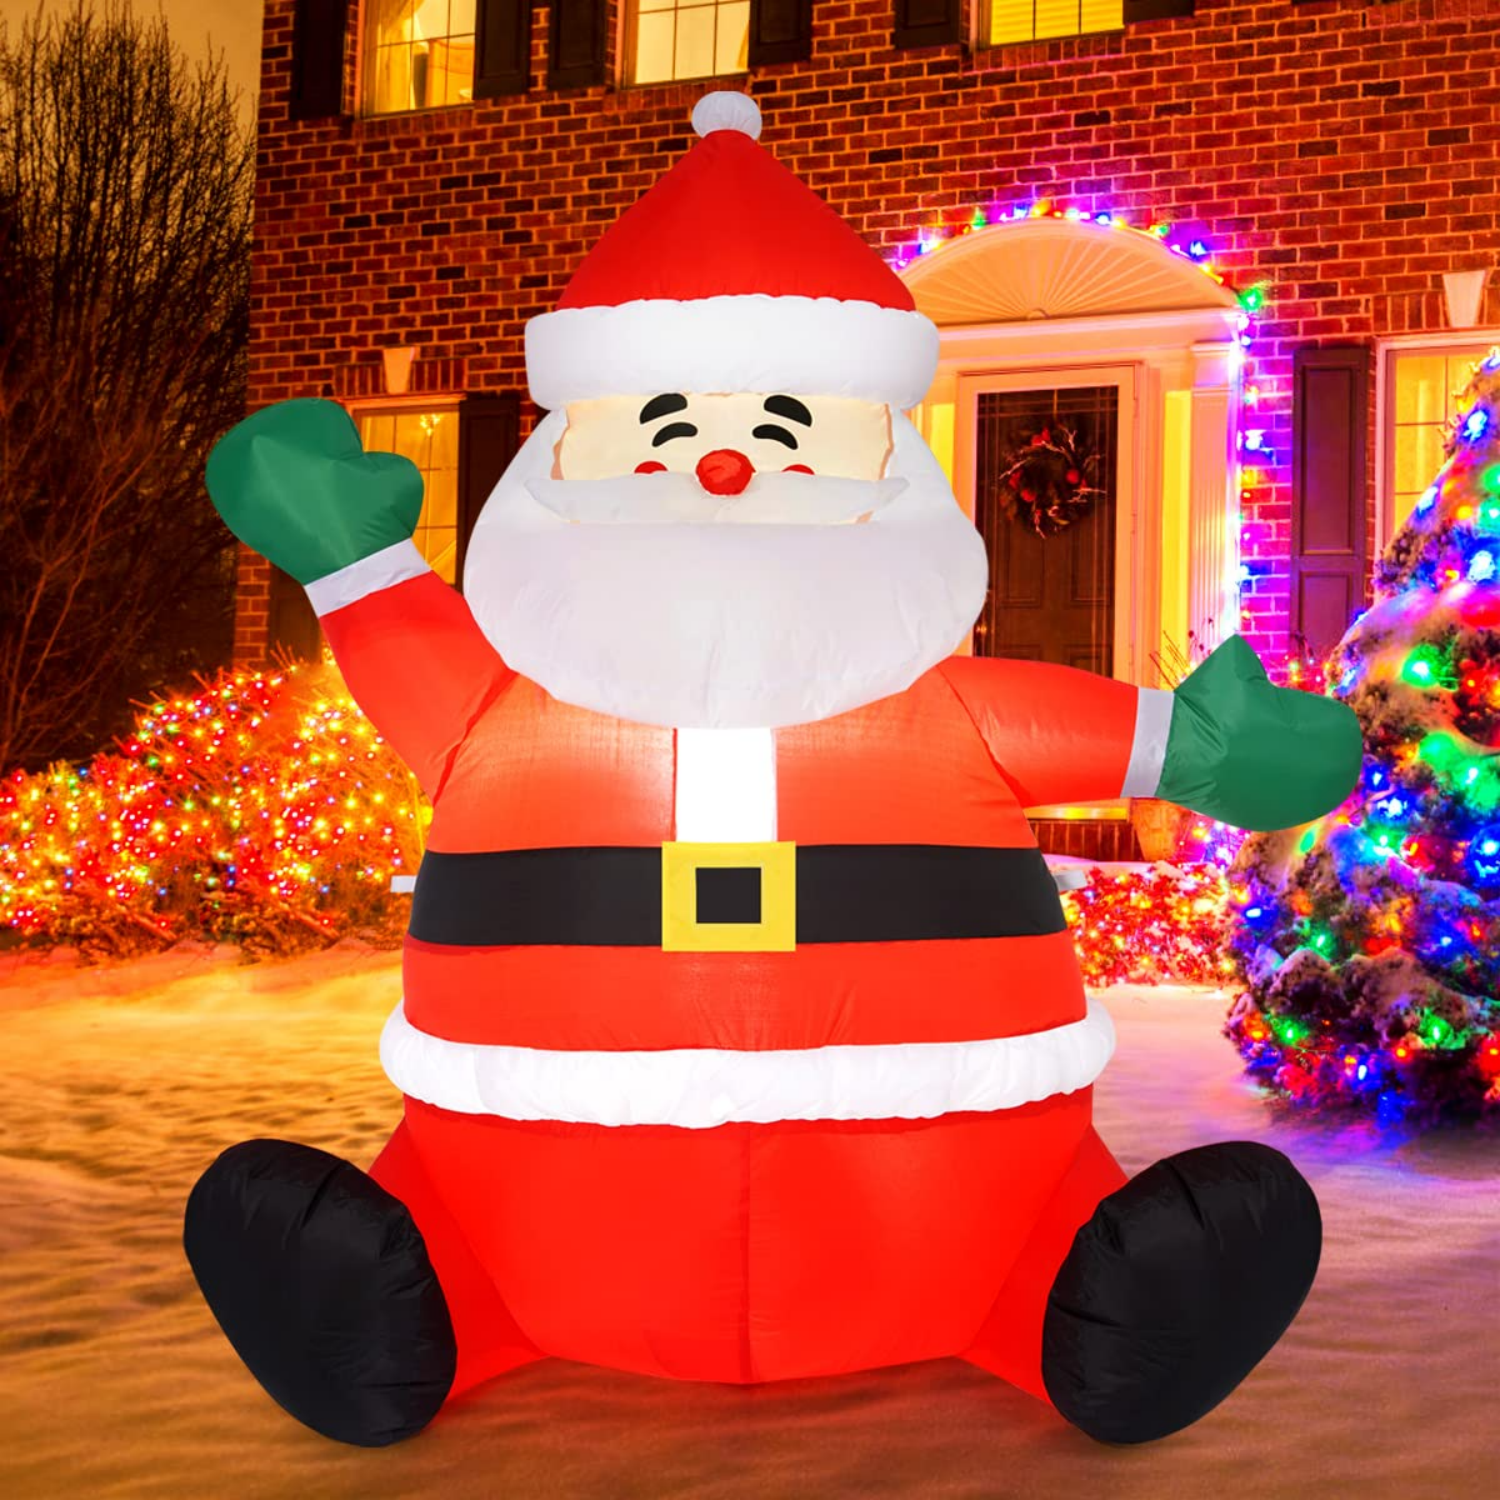 Cokeymove Christmas Inflatable 5 Feet Christmas Santa Claus LED Lights Air Decoration Statue Waving Hand And Holding Gift Box Waterproof Landscape Lights For Outdoor Indoor Use Yard Lawn Garden 